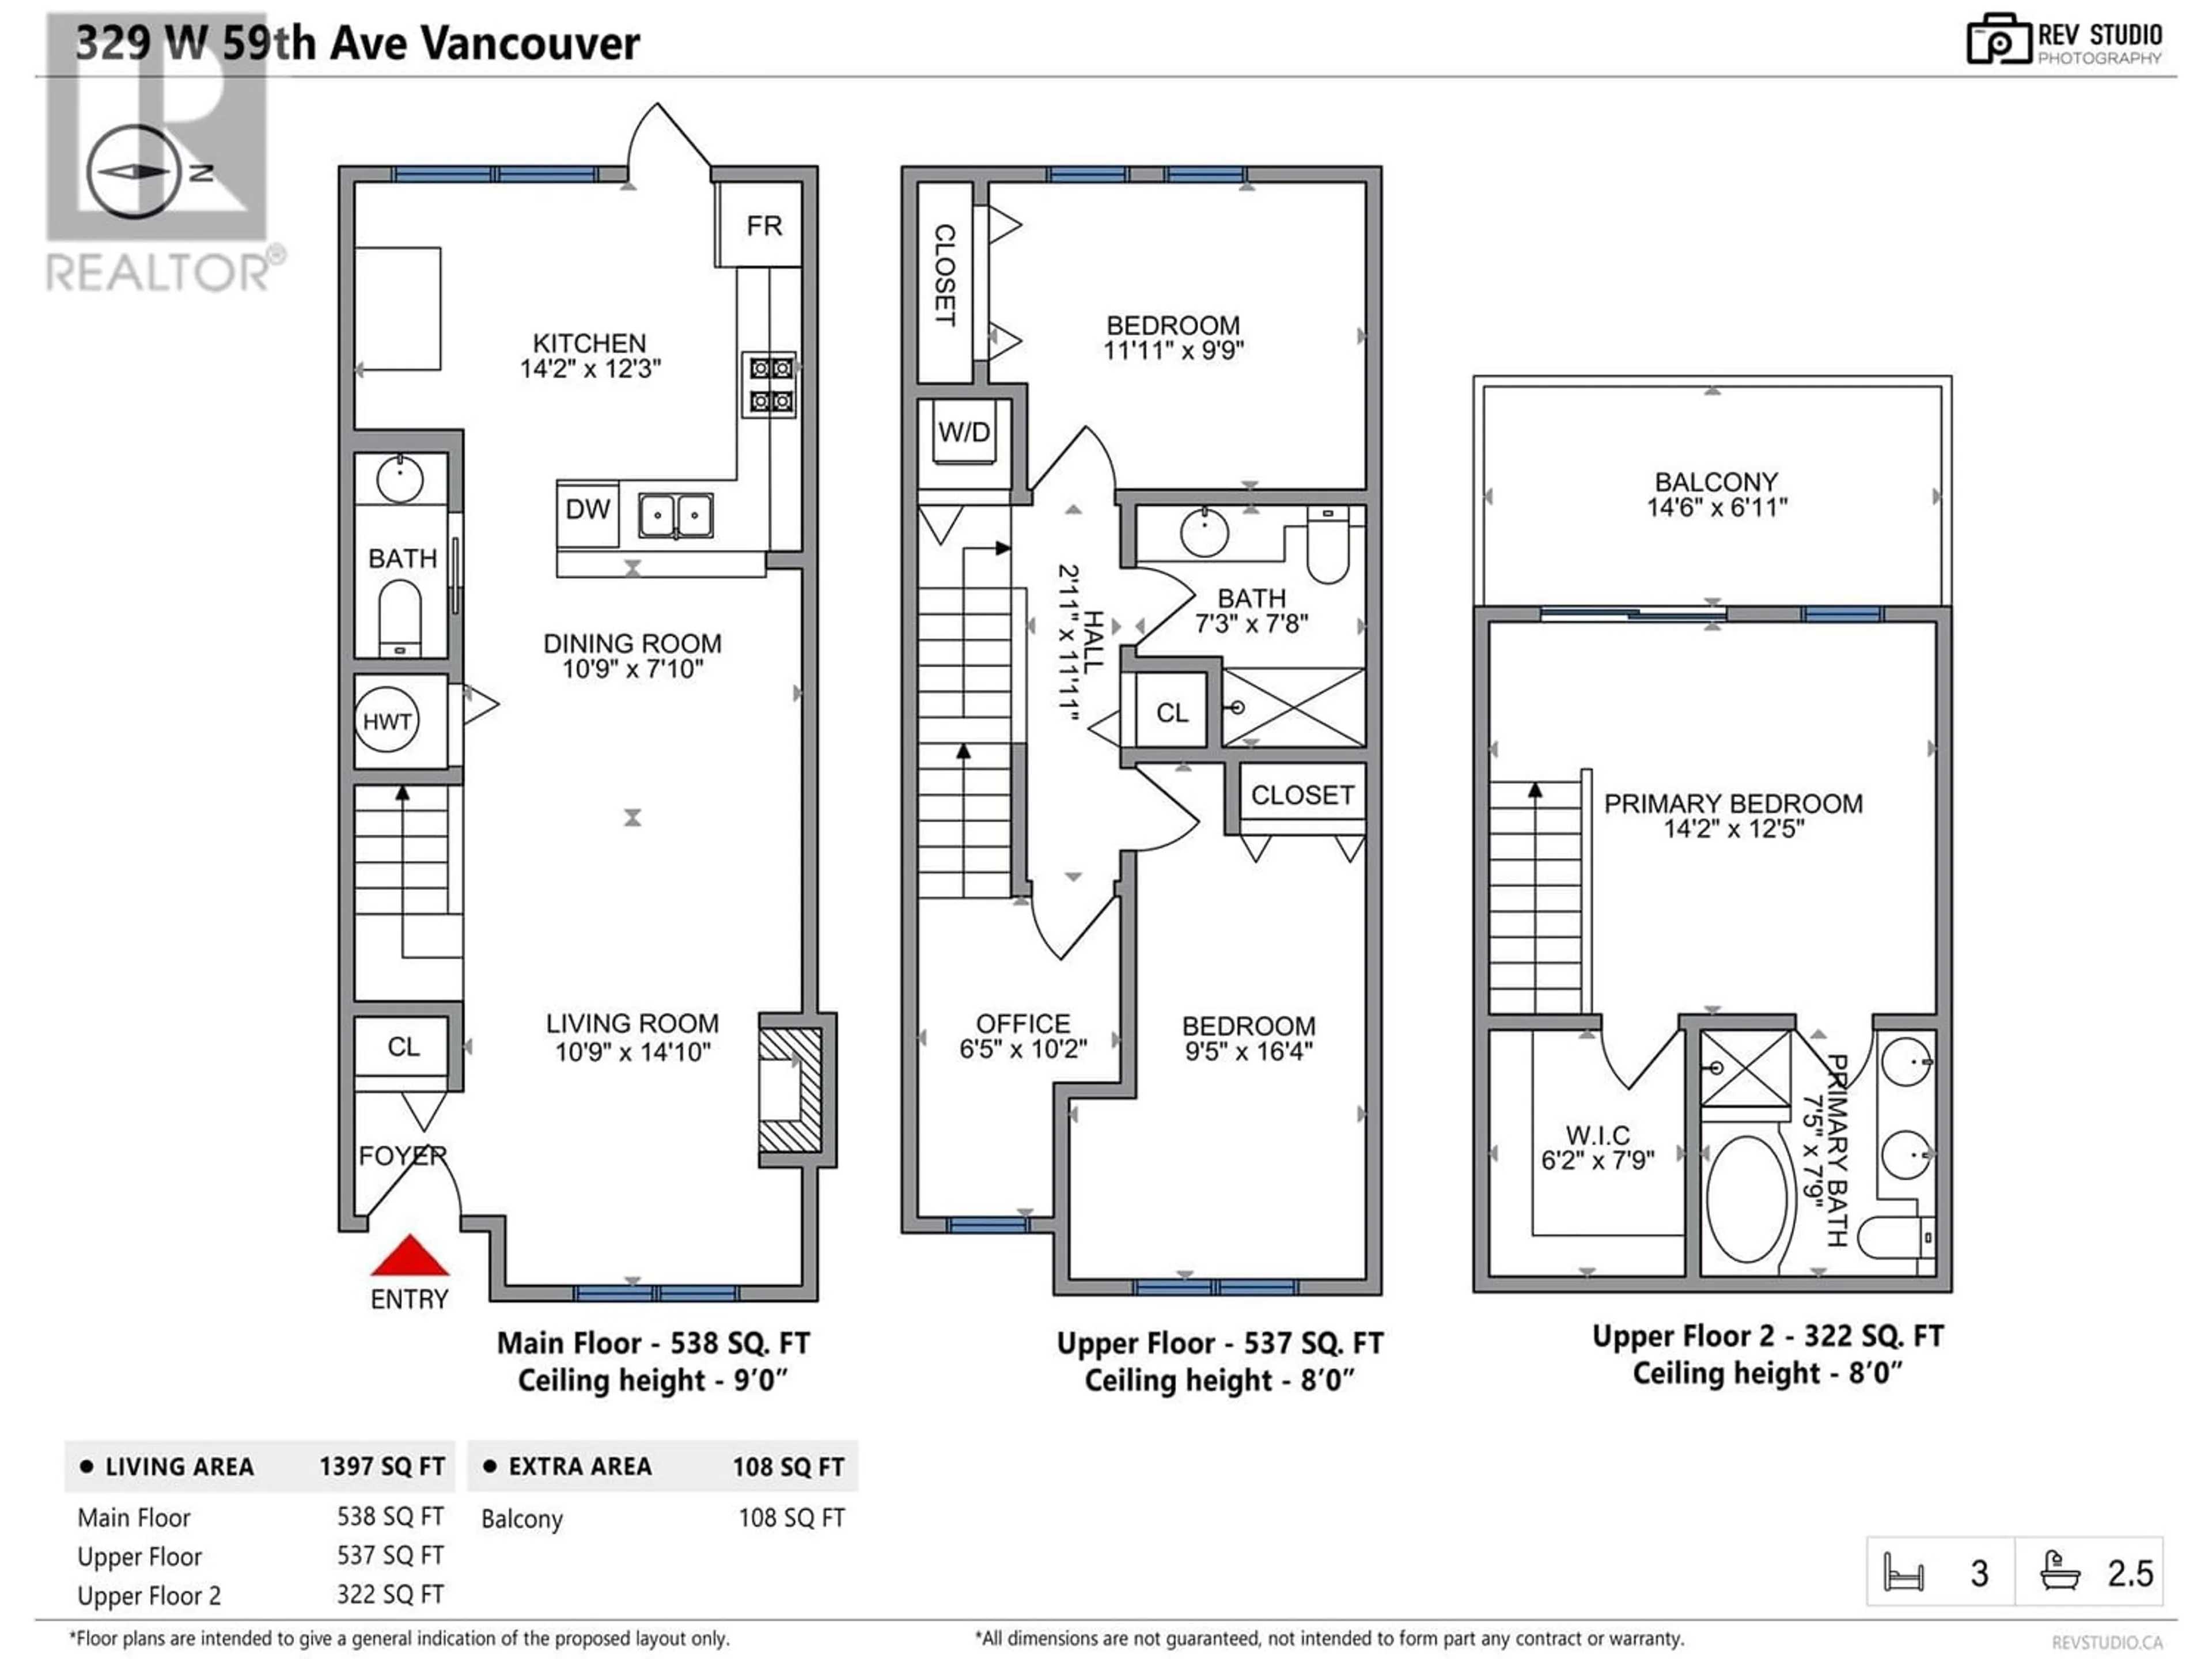 Floor plan for 329 W 59TH AVENUE, Vancouver British Columbia V5X1X3